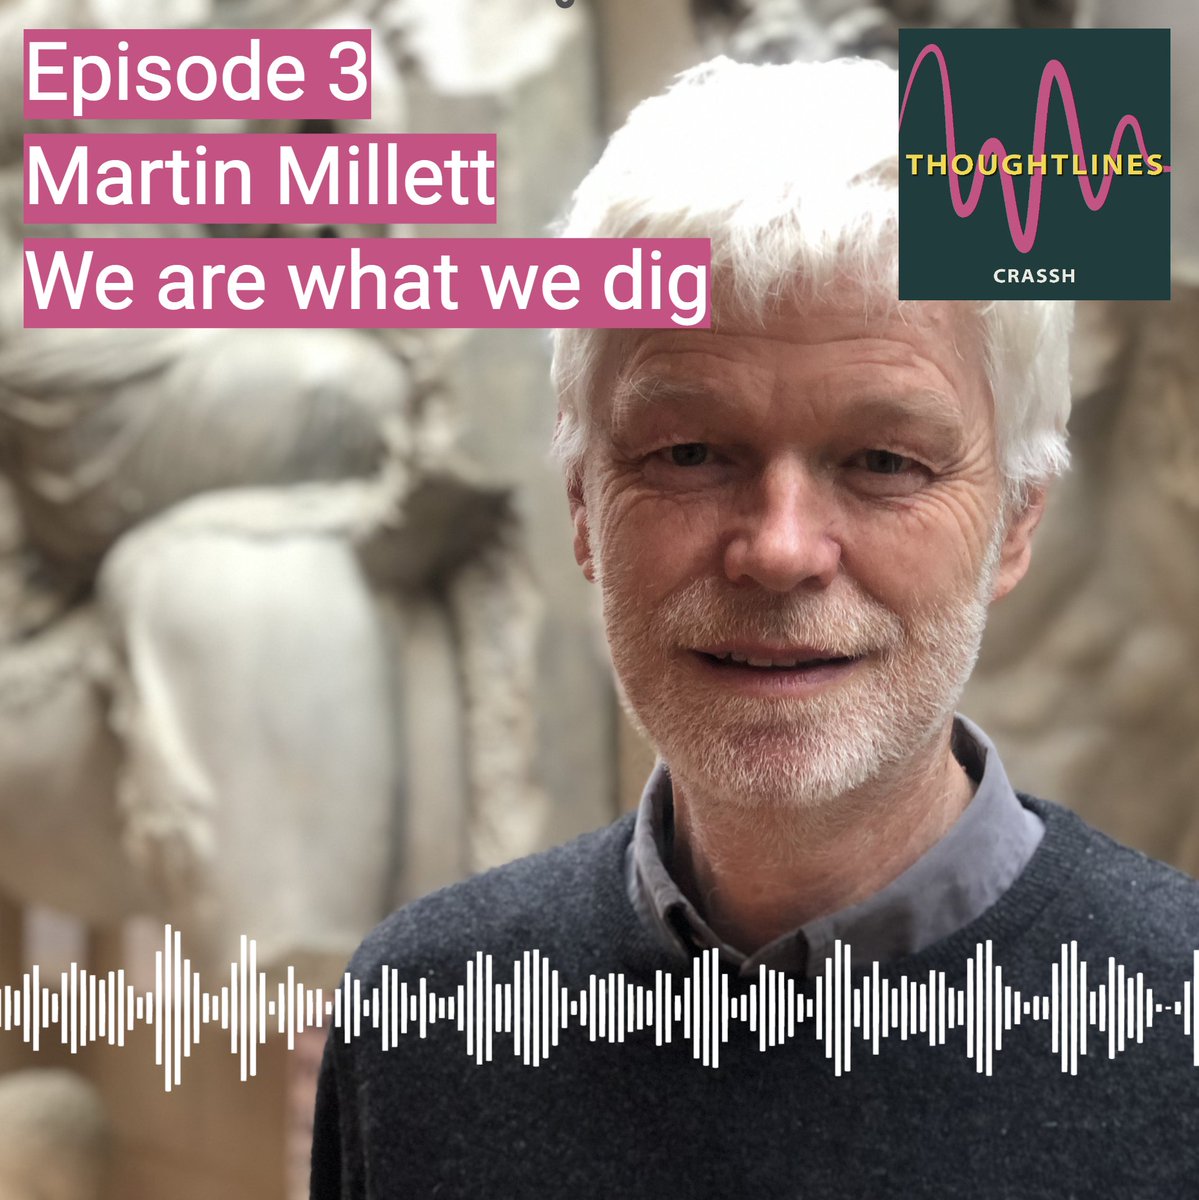 🎧 Out now! Episode 3 of our #ThoughtlinesPodcast⁠.⁠ ⁠Martin Millett: We are what we dig Learn about ground-breaking changes in how we search & respond to the landscape of the past.⁠ Listen & subscribe ➞ bit.ly/3lnUK8J. #20yearsCRASSH🎉 #archaeology #radar #SoundArt